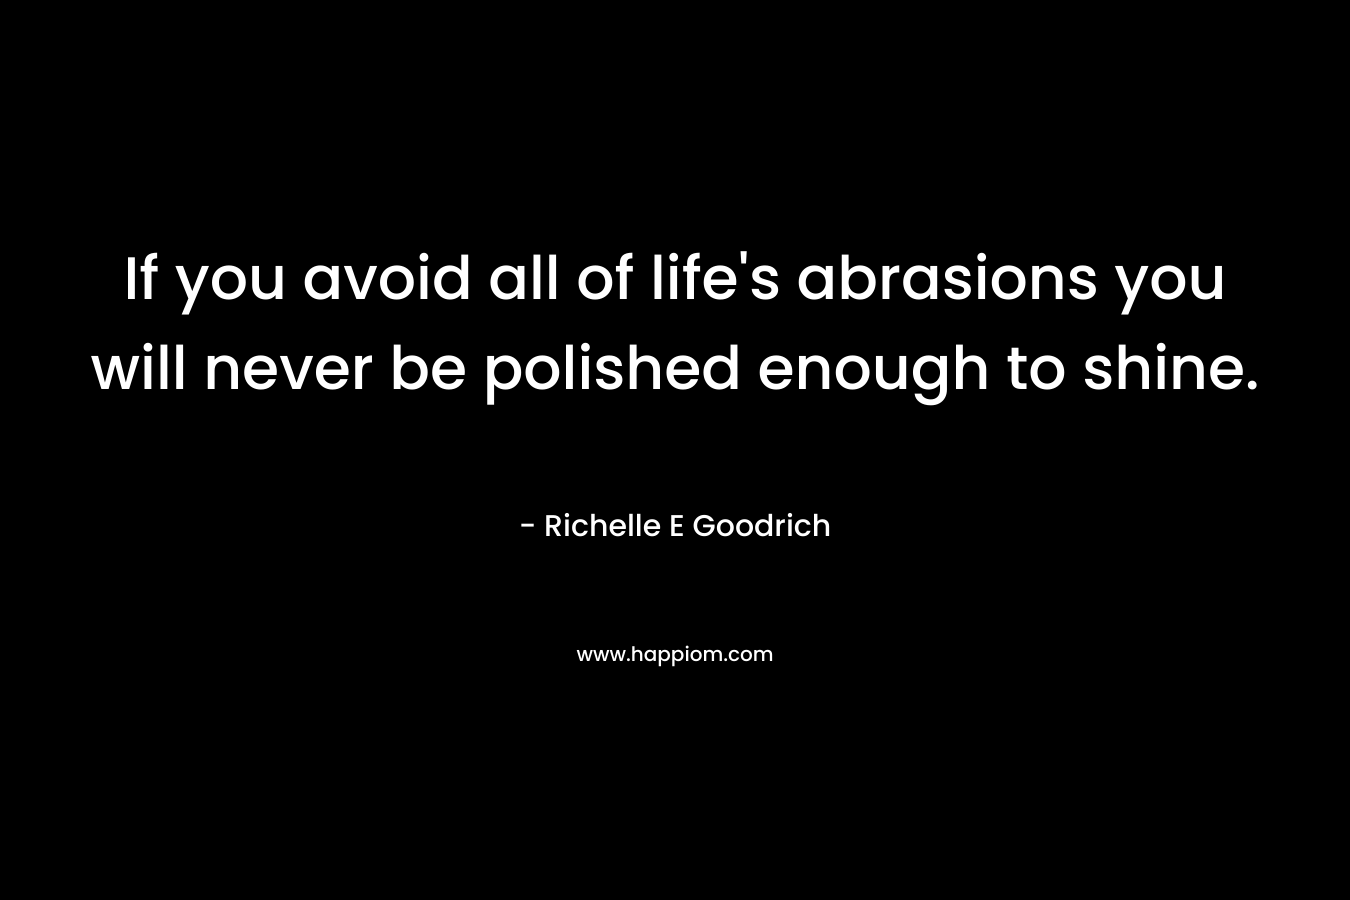 If you avoid all of life's abrasions you will never be polished enough to shine.